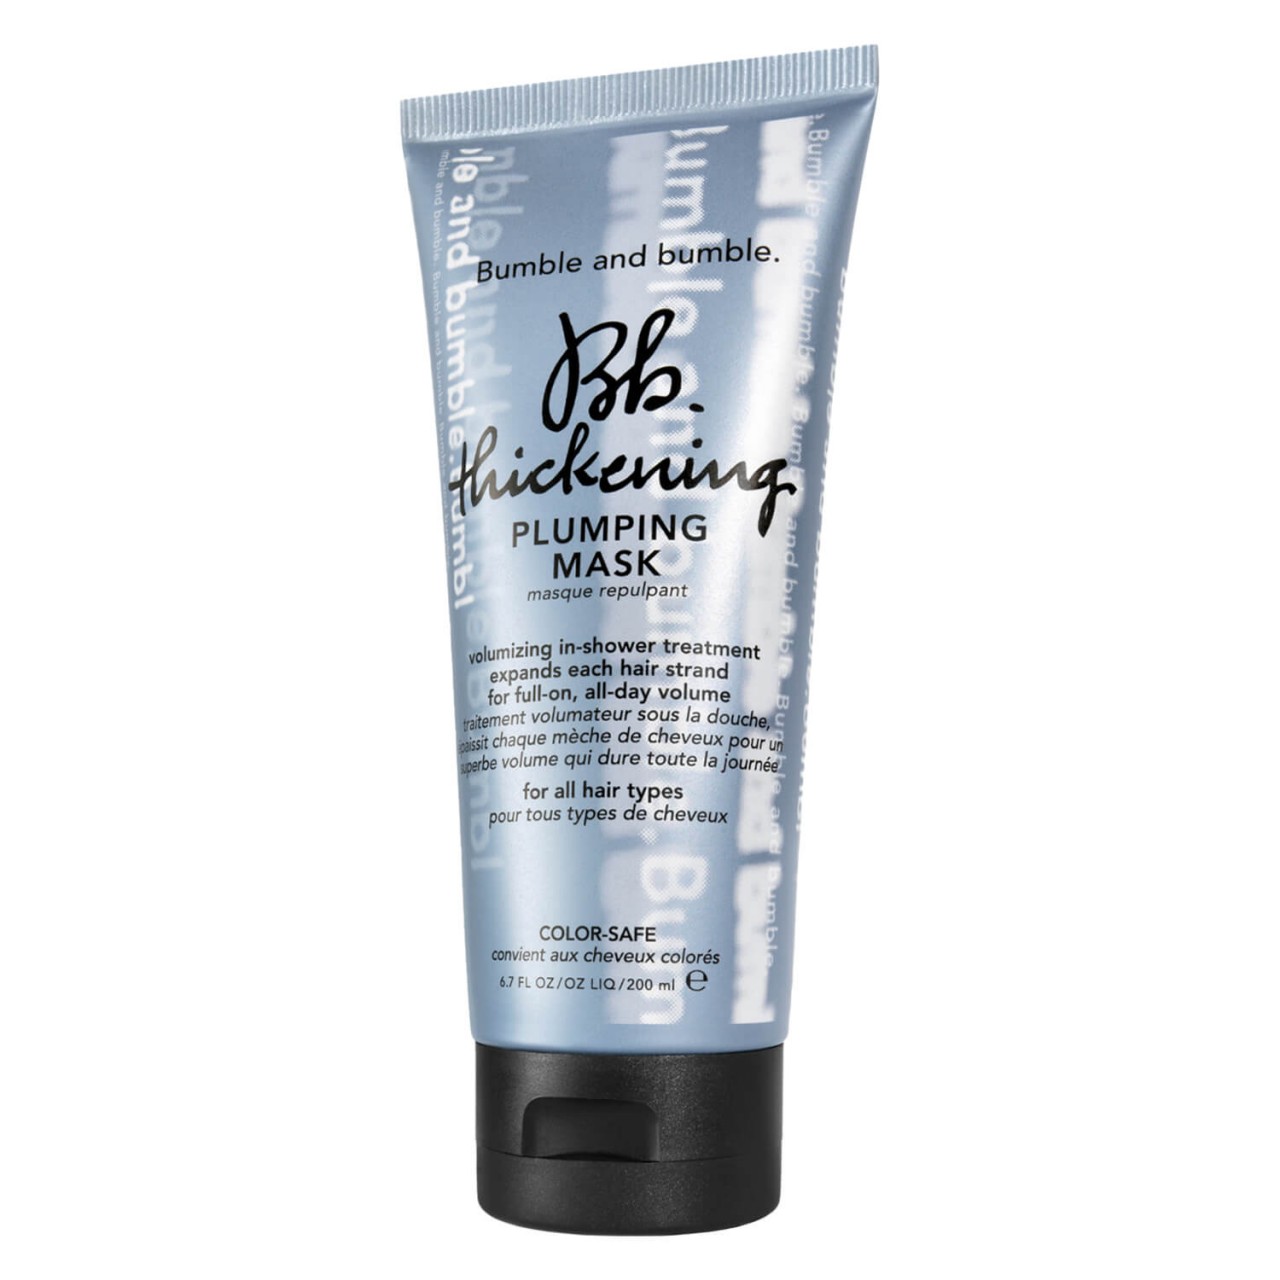 Bb. Thickening Plumping Mask von Bumble and bumble.